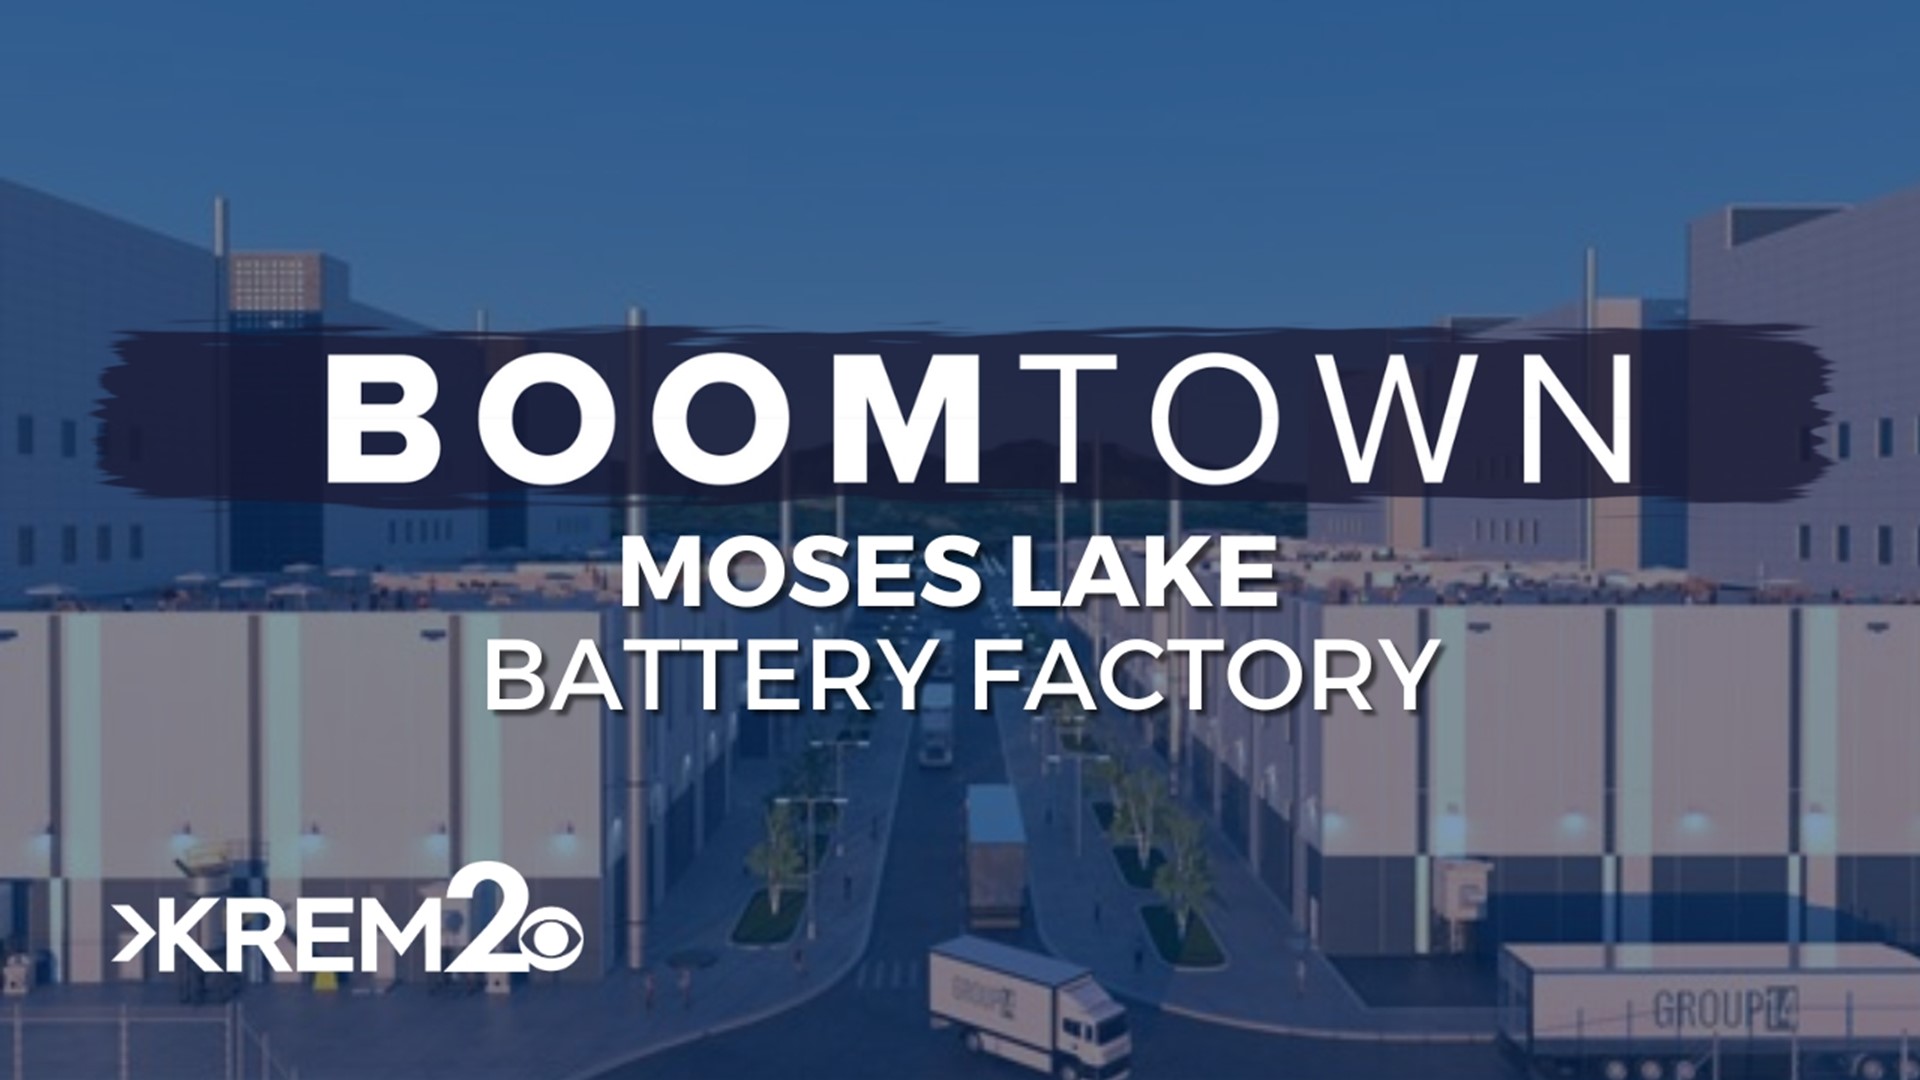 Group14 is expected to open more factories in the future to continue to expand its footprint in Moses Lake.